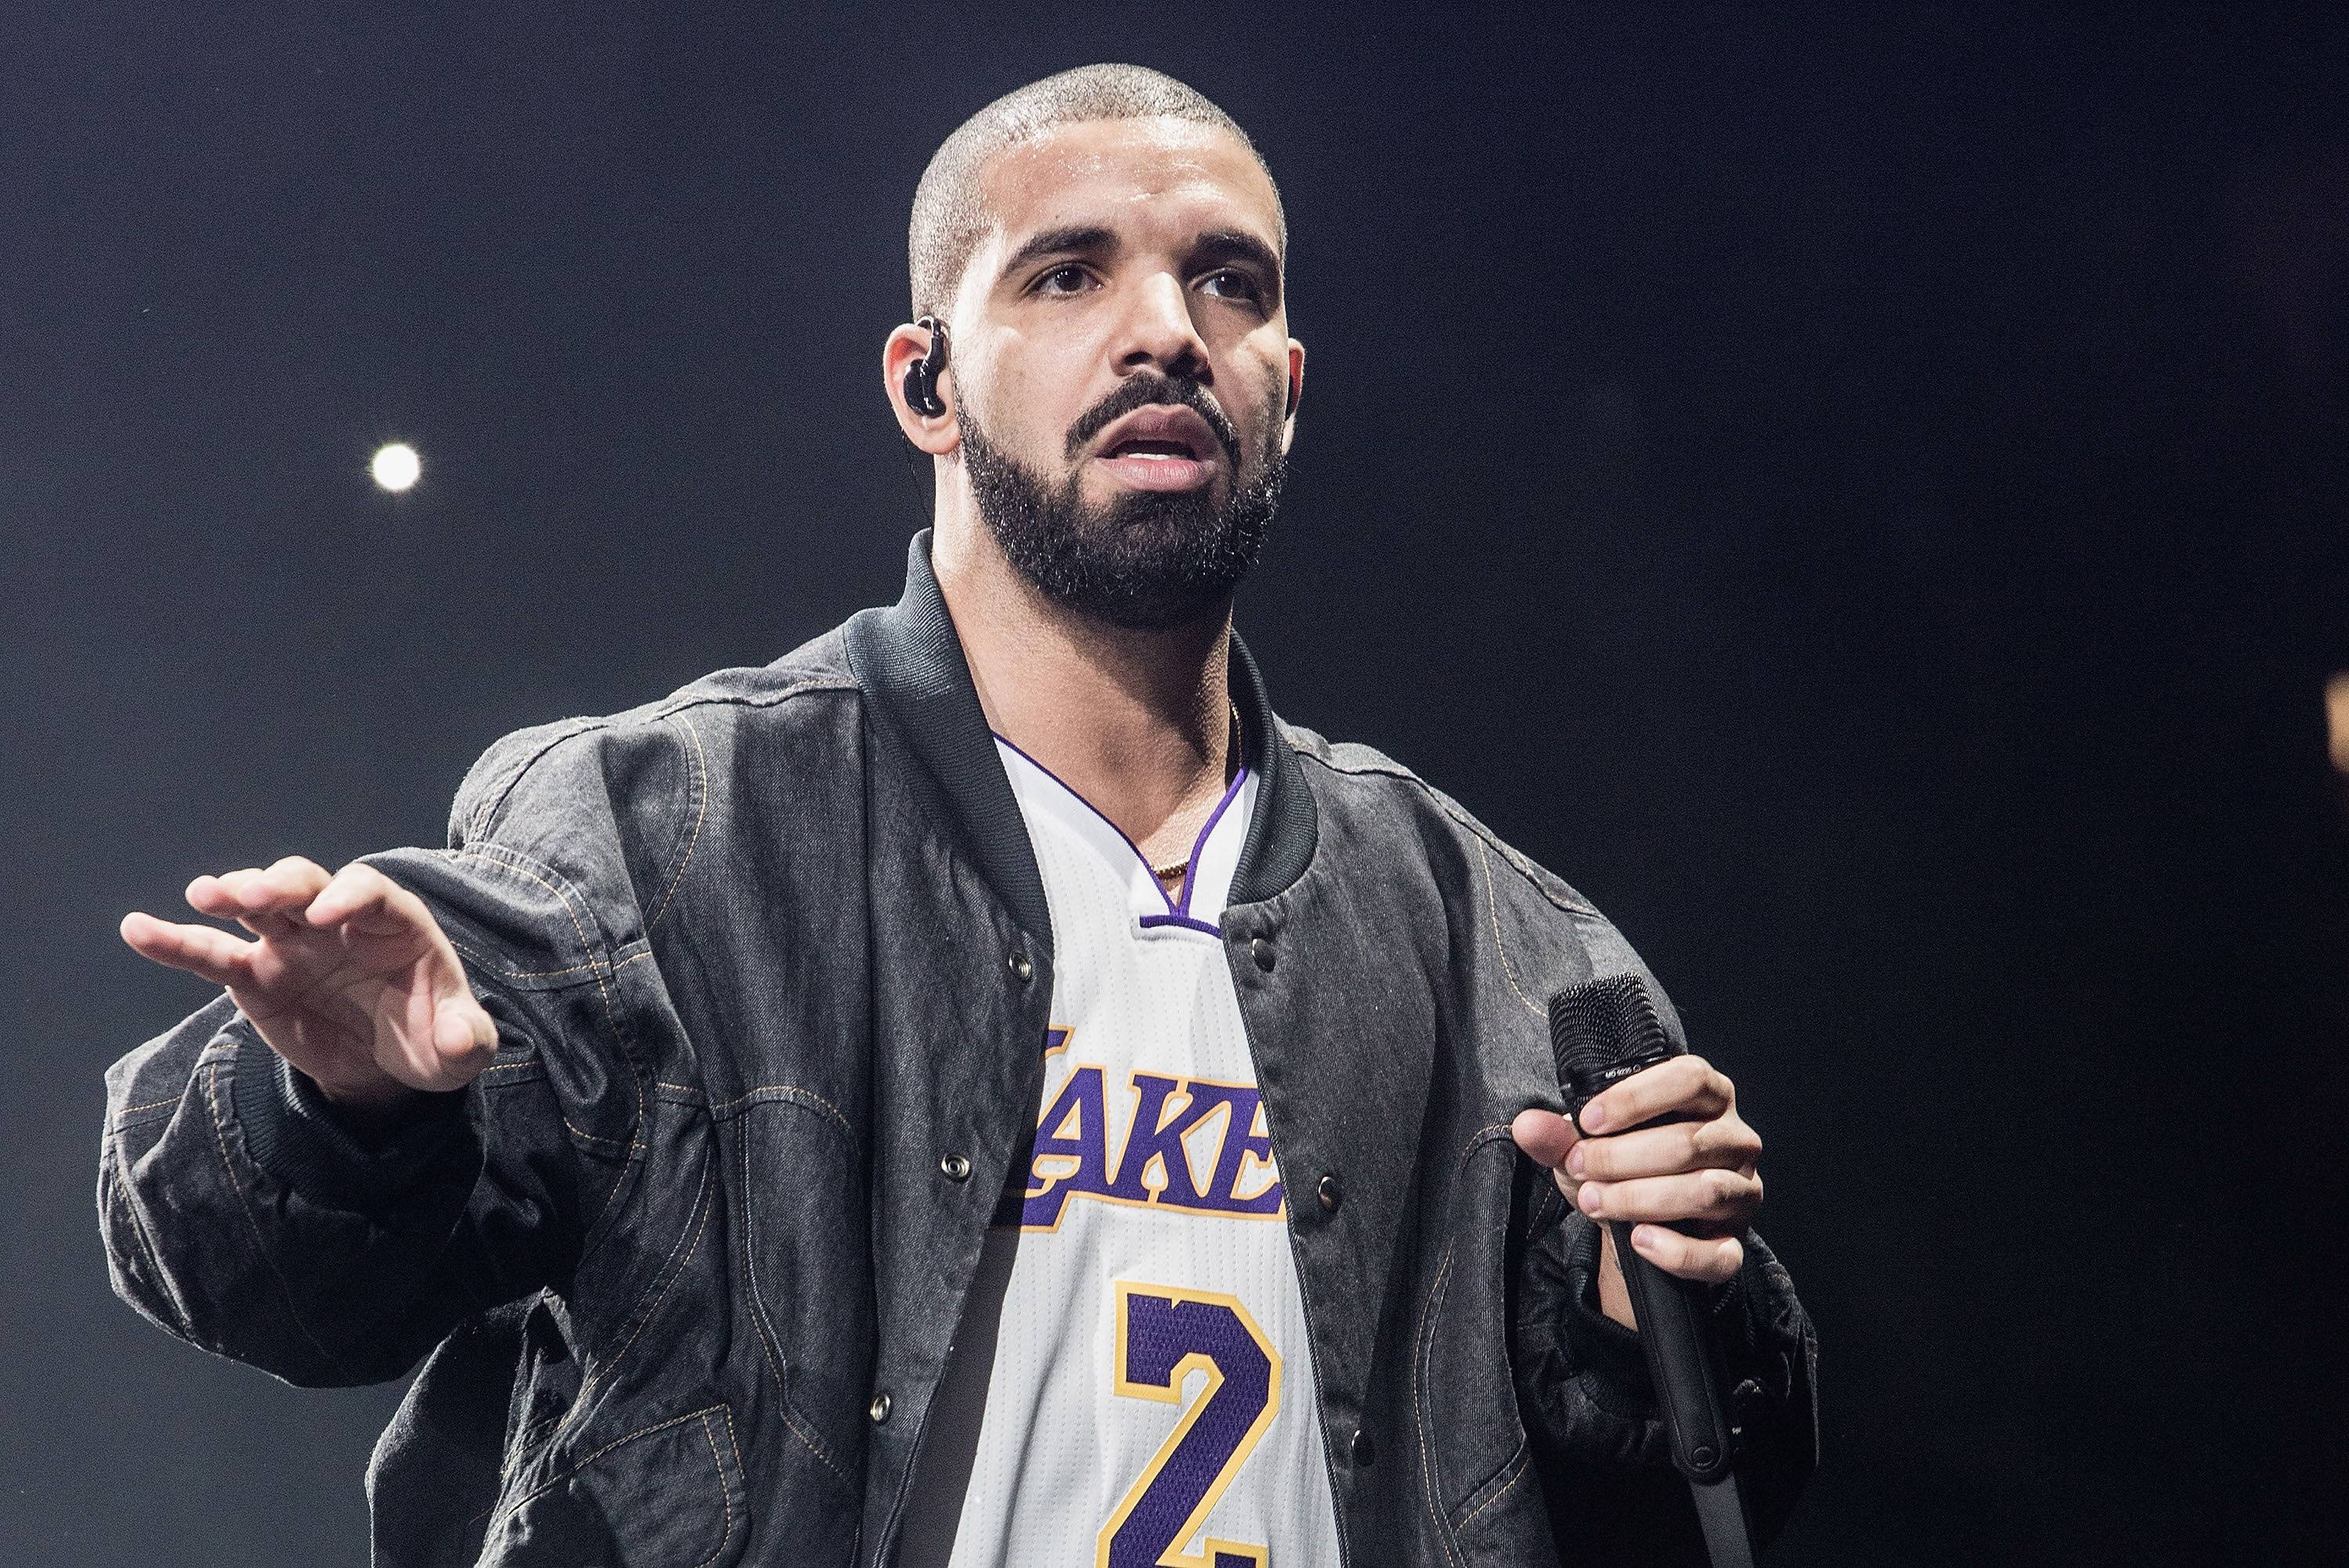 Drake defends his relationship with teenager Millie Bobby Brown